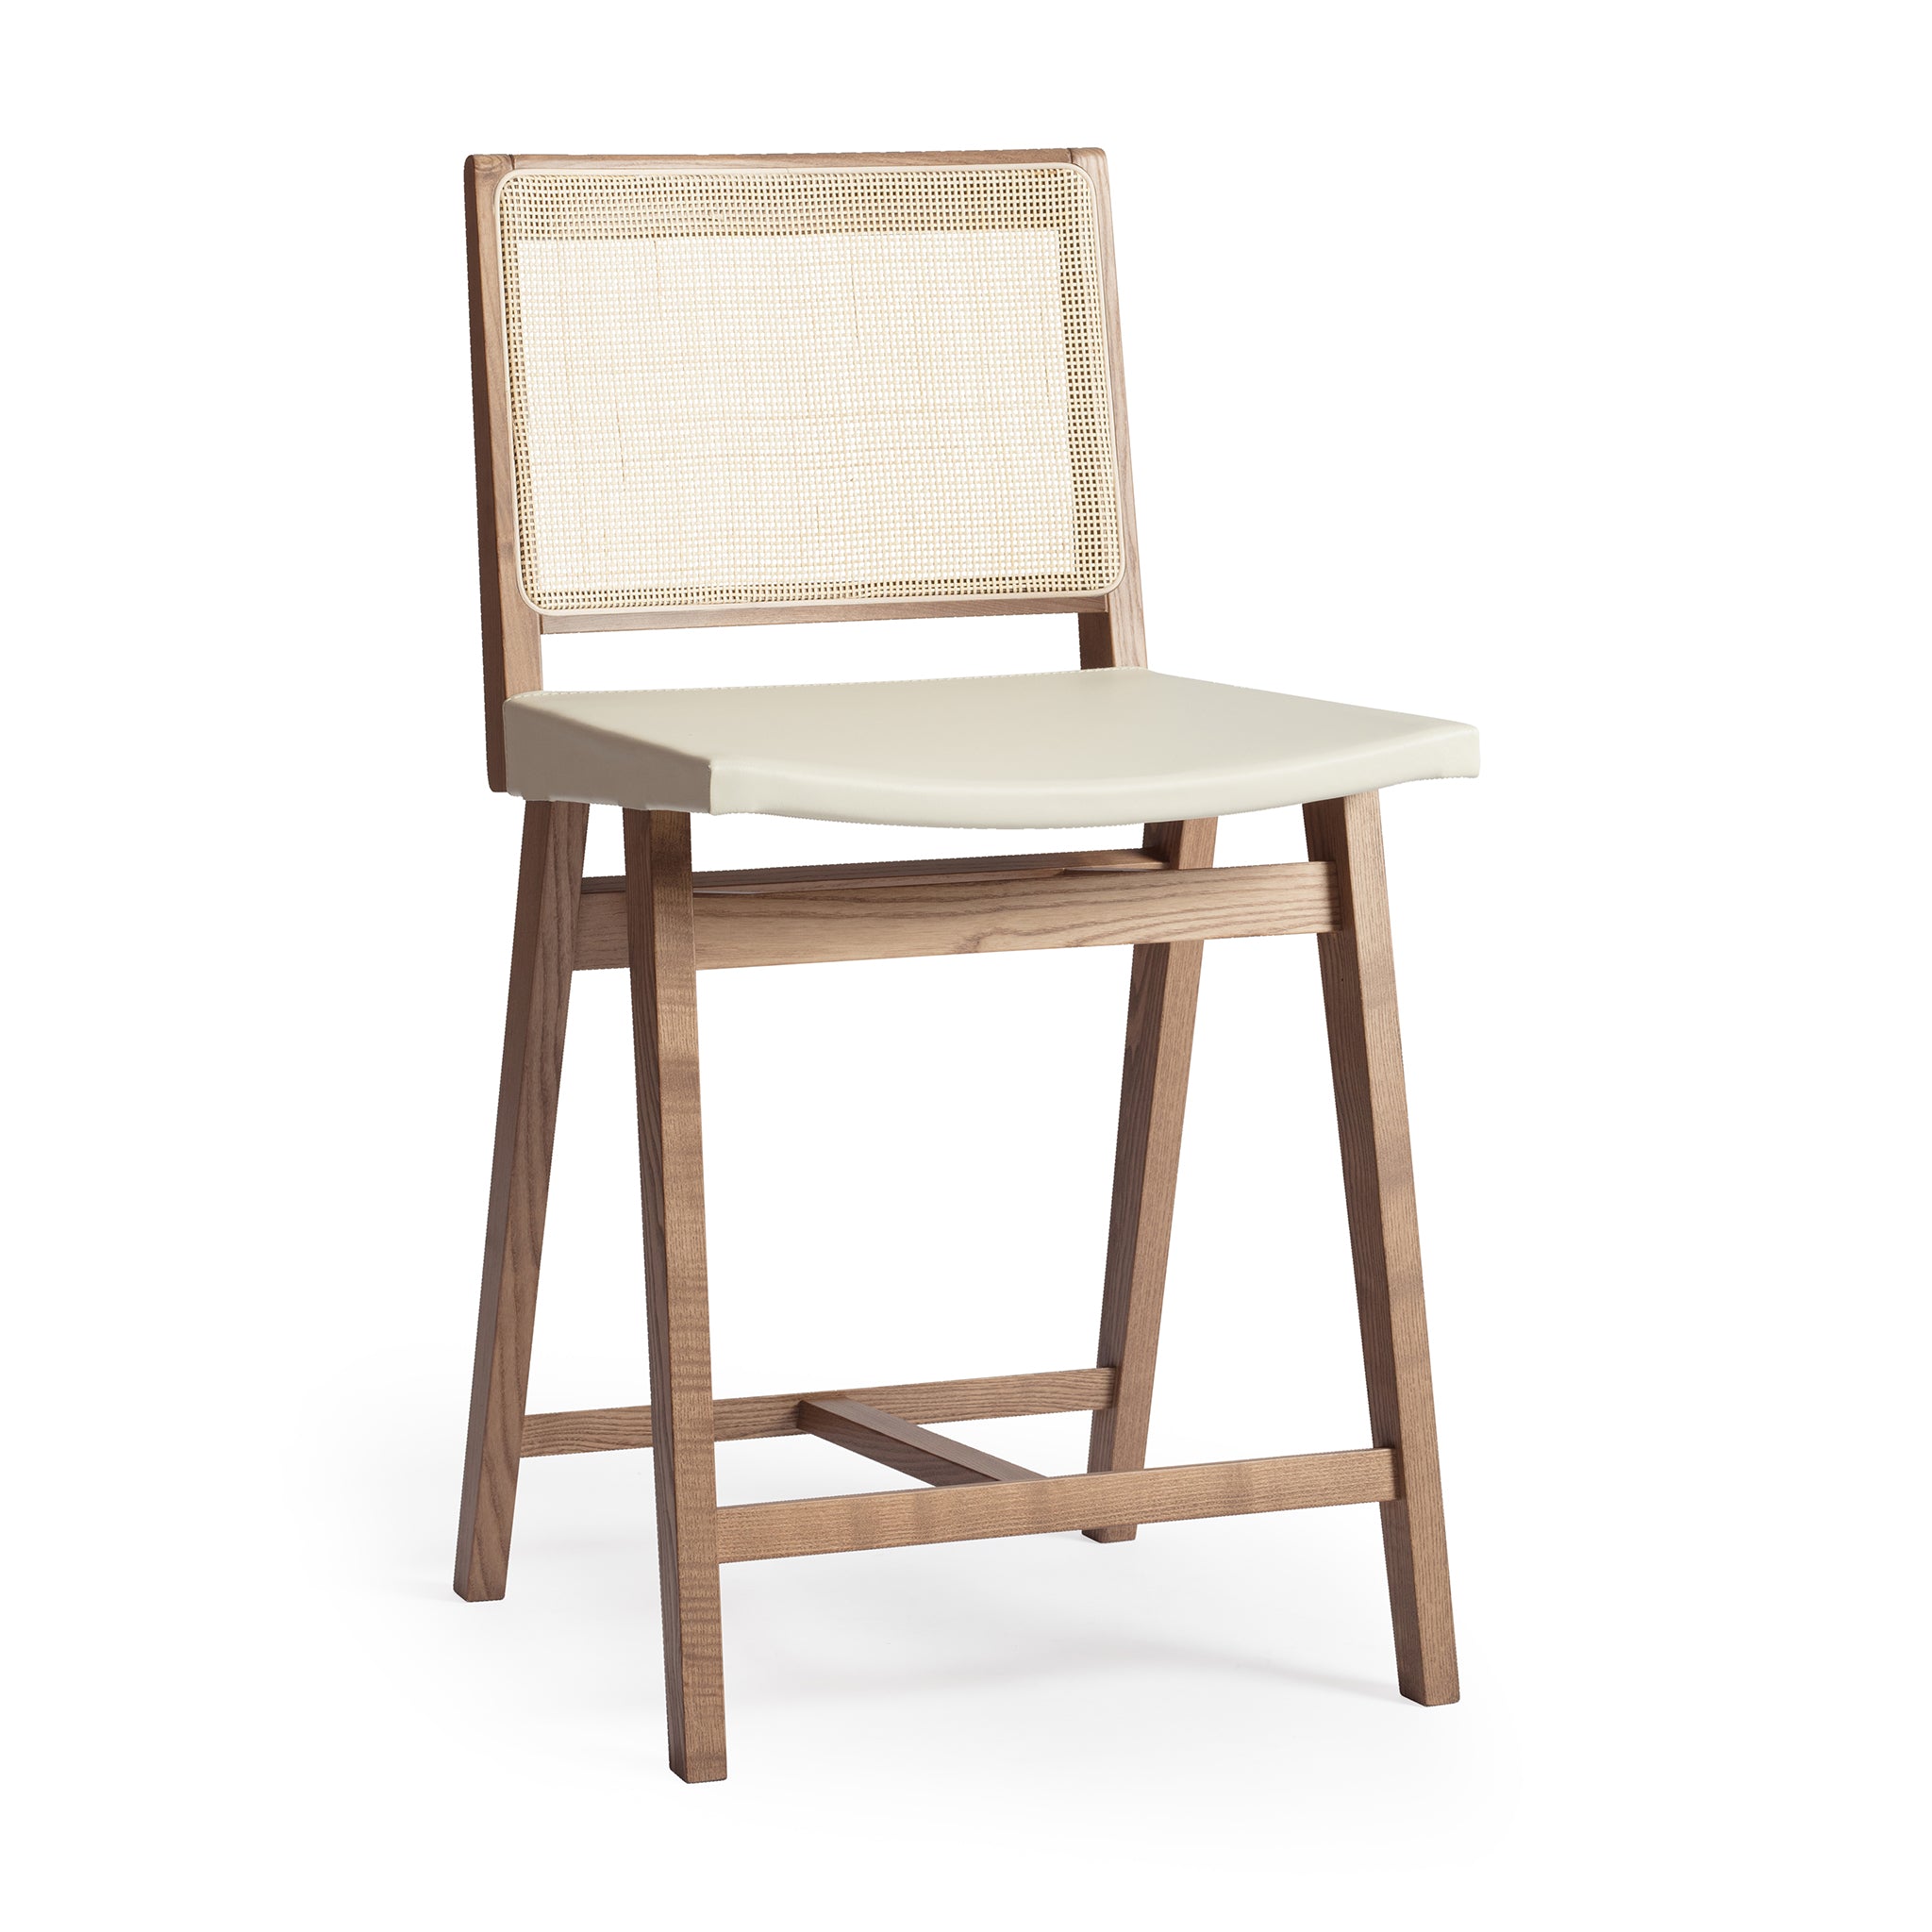 Main view of an Elye modern kitchen counter stool, walnut stained ash frame, square weave cane back, contract grade off white leather seat, produced by Klarel in Italy. #K43-1